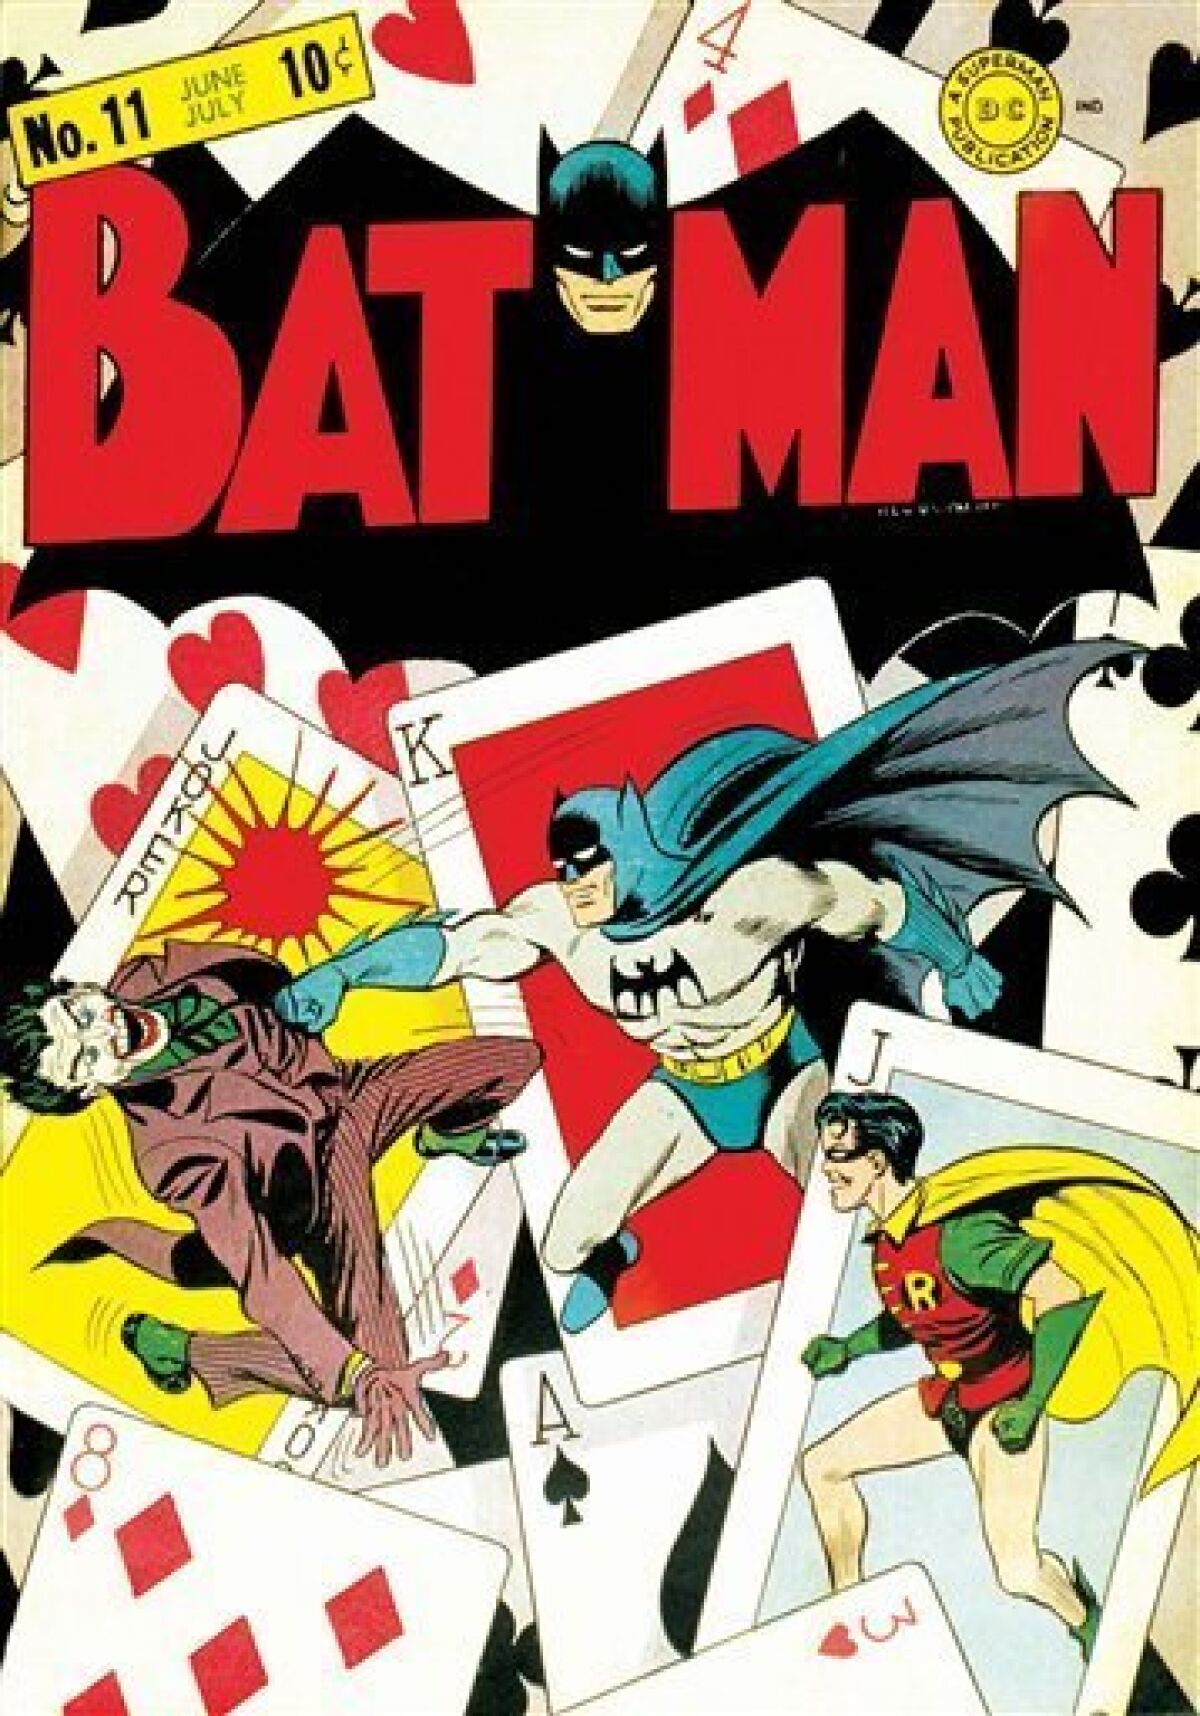 In this undated photo provided by DC Comics, the issue 11 cover of "Batman" is shown. Jerry Robinson, the artist who helped create "The Joker" in the Batman series has died on Wednesday, Dec. 7, 2011 in New York City. He was 89. (AP Photo/DC Comics, Jerry Robinson)